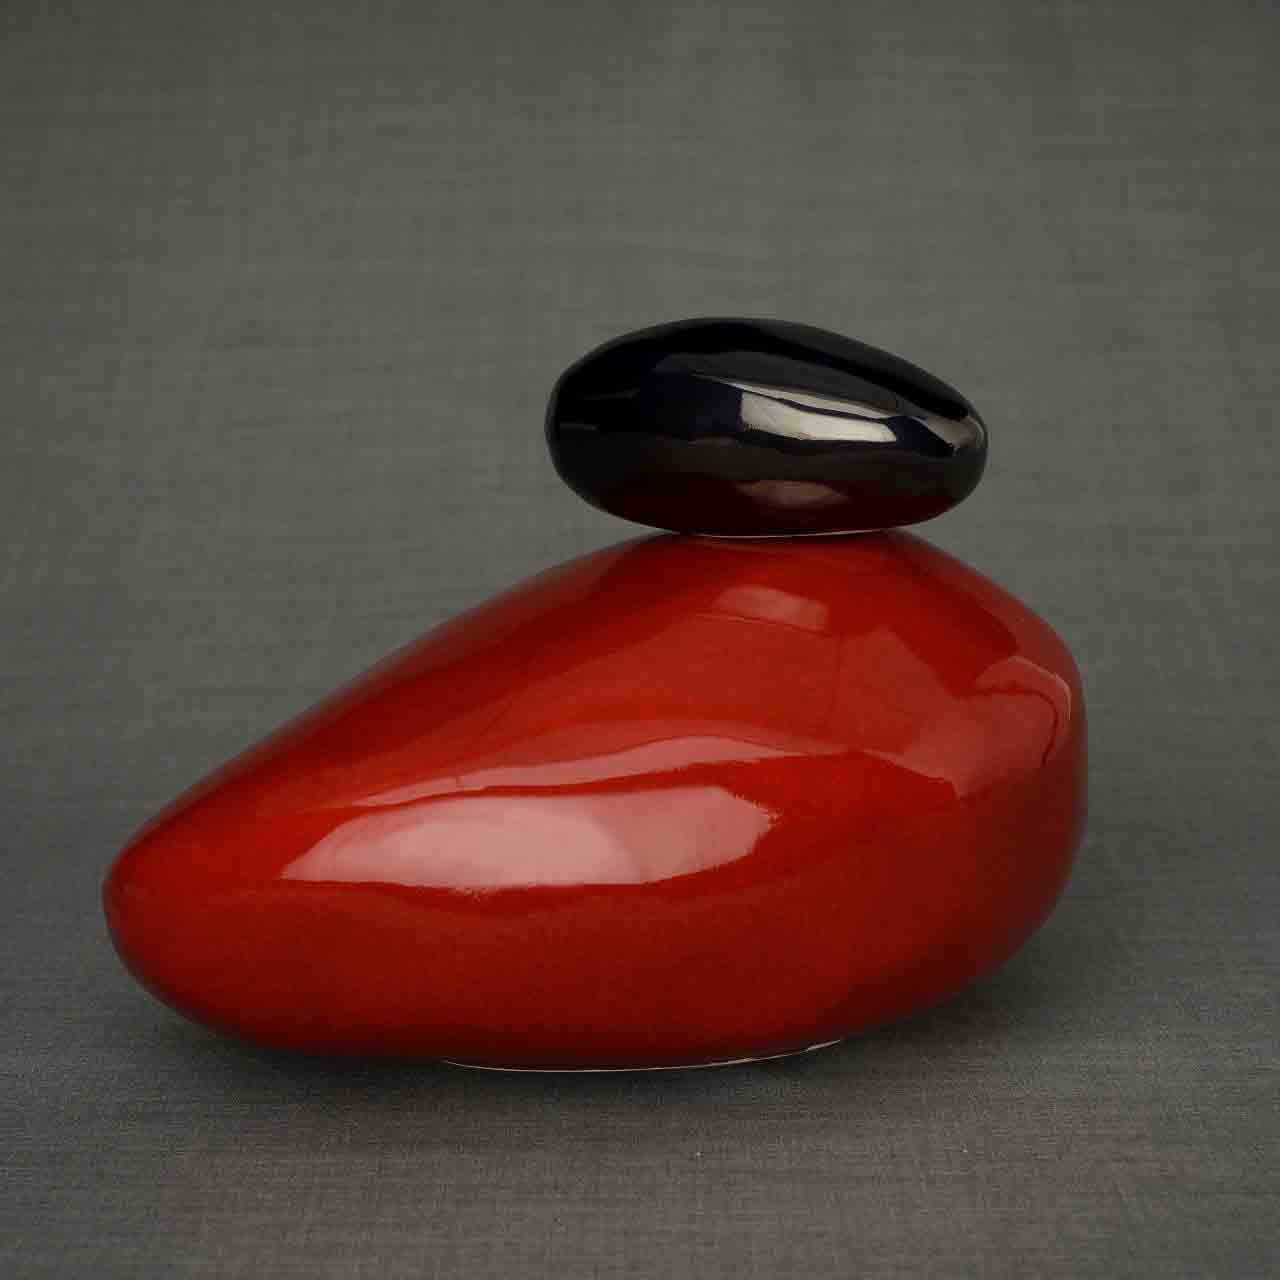 Pebbles Adult Cremation Urn for Ashes in Red and Black